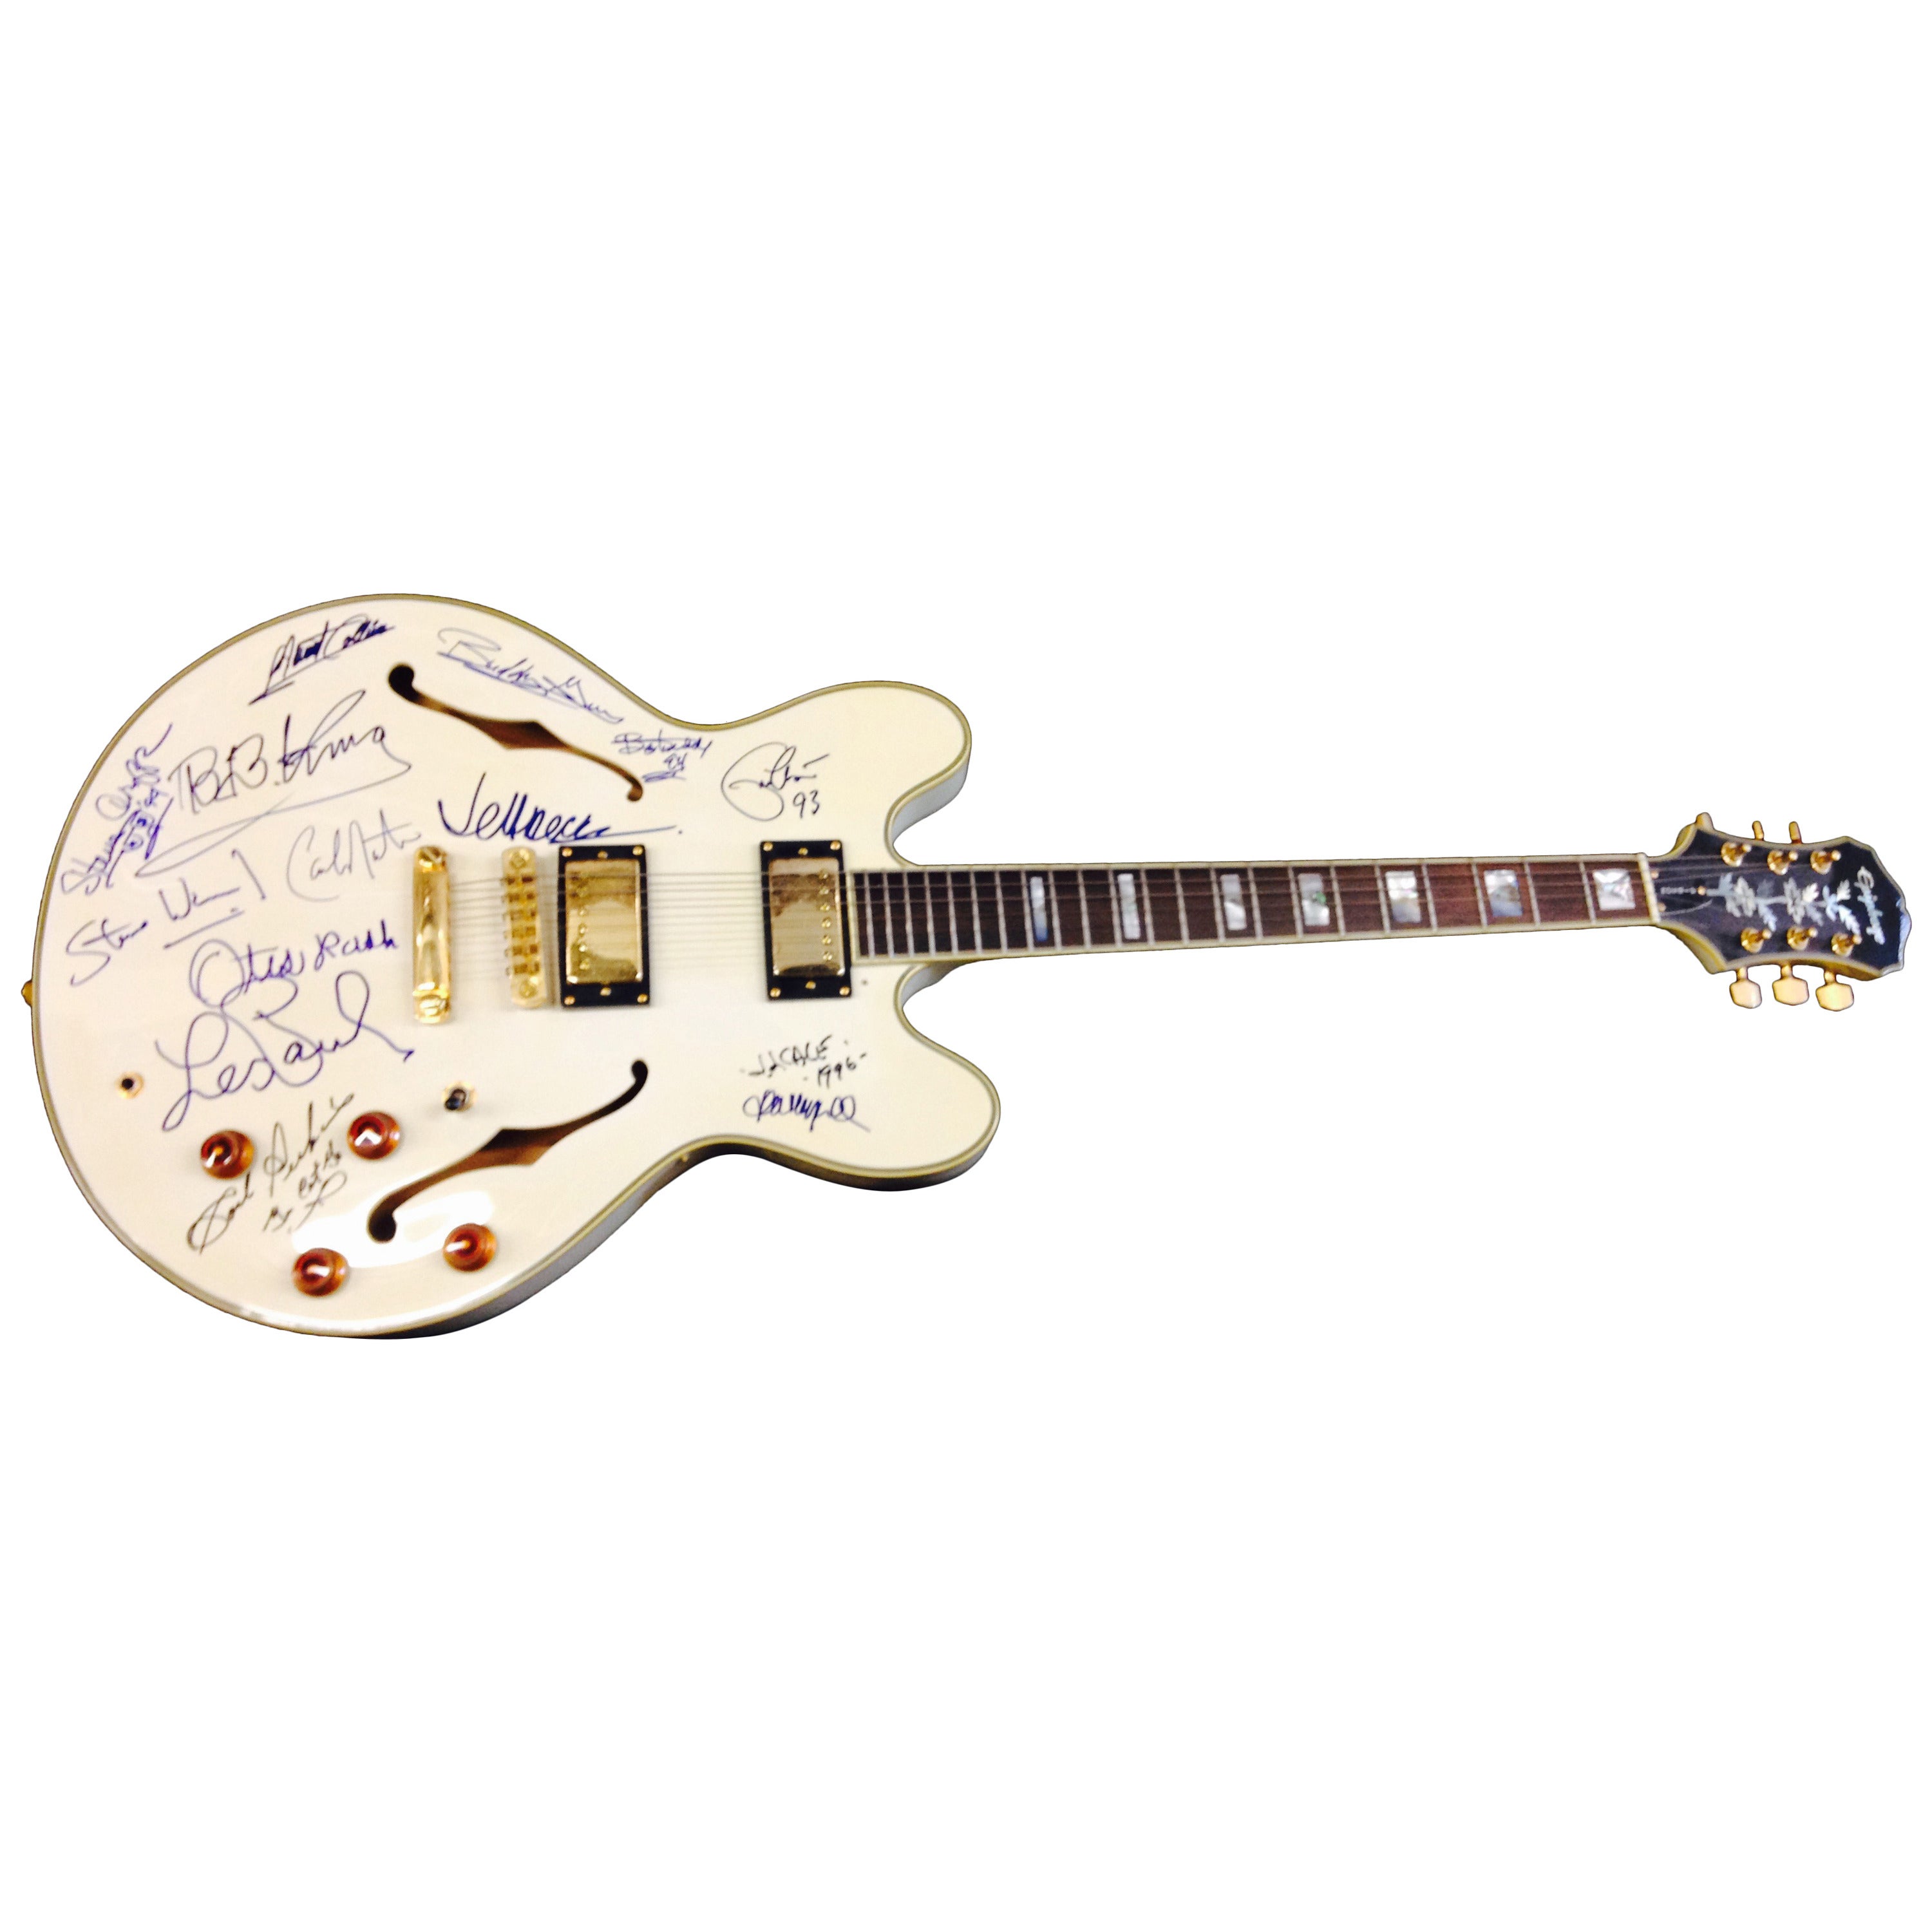 Ephiphone Sheraton Guitar Autographed by Music Legends For Sale